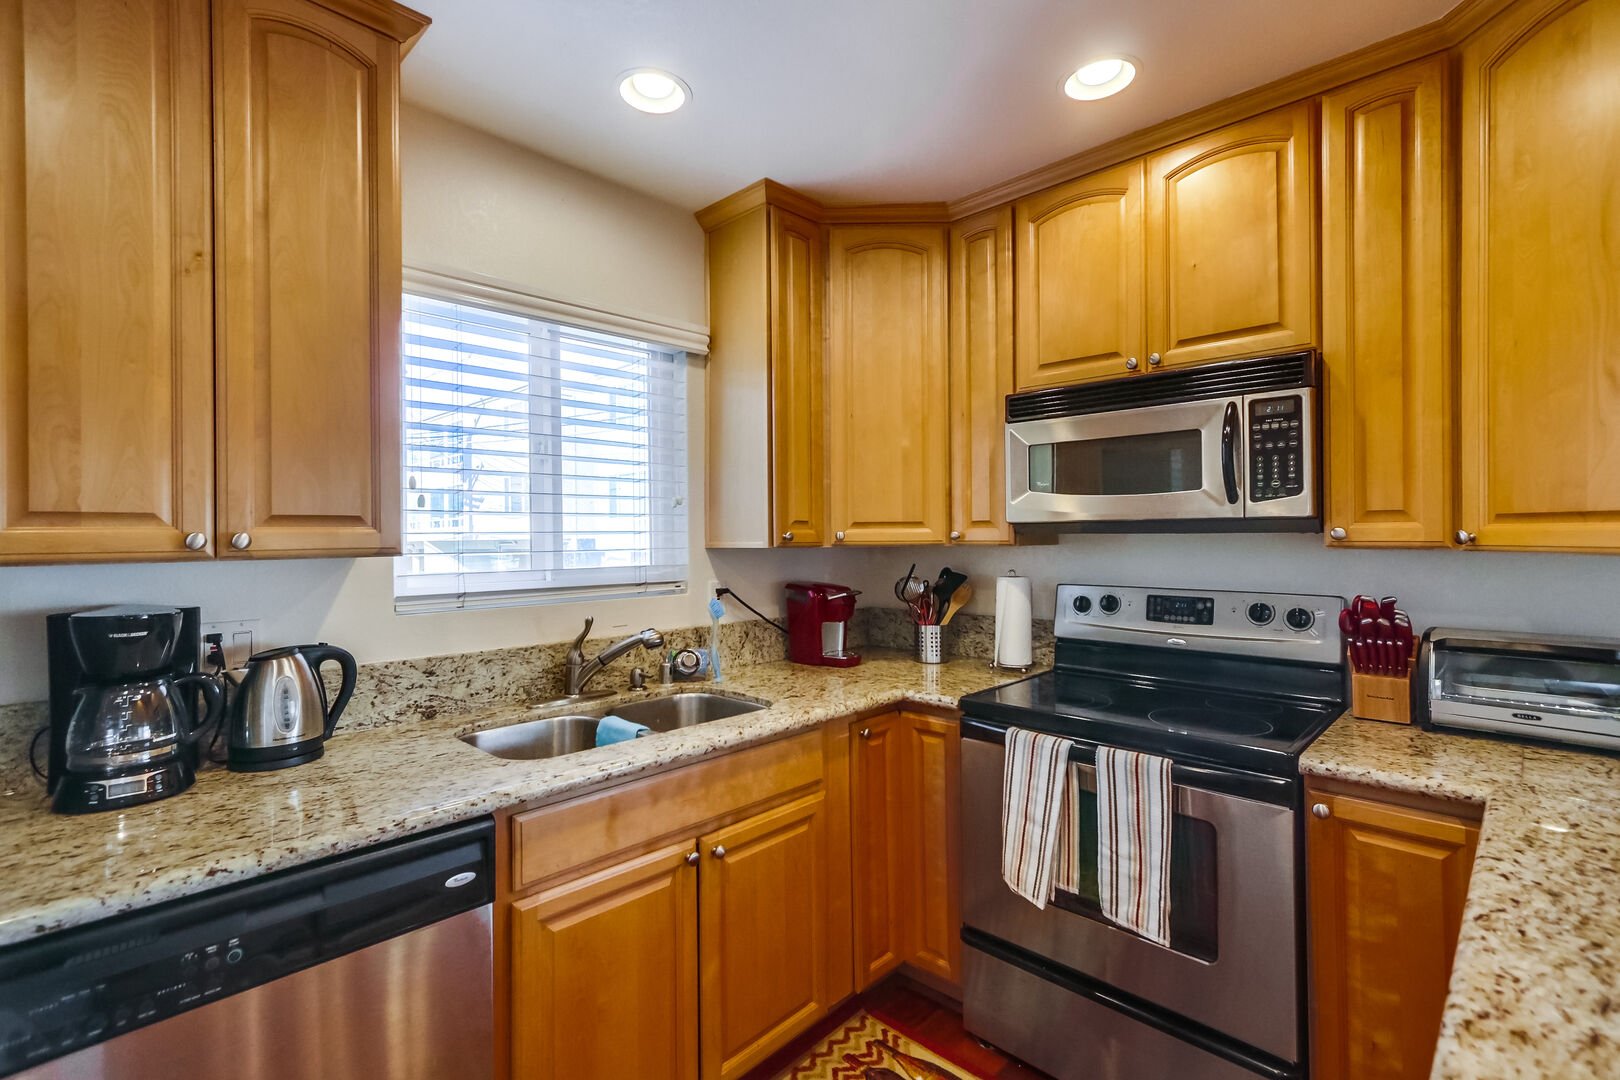 Kitchen with stainless steel appliances, granite countertops, sink, dishwasher, refrigerator, coffee maker, toaster, and blender